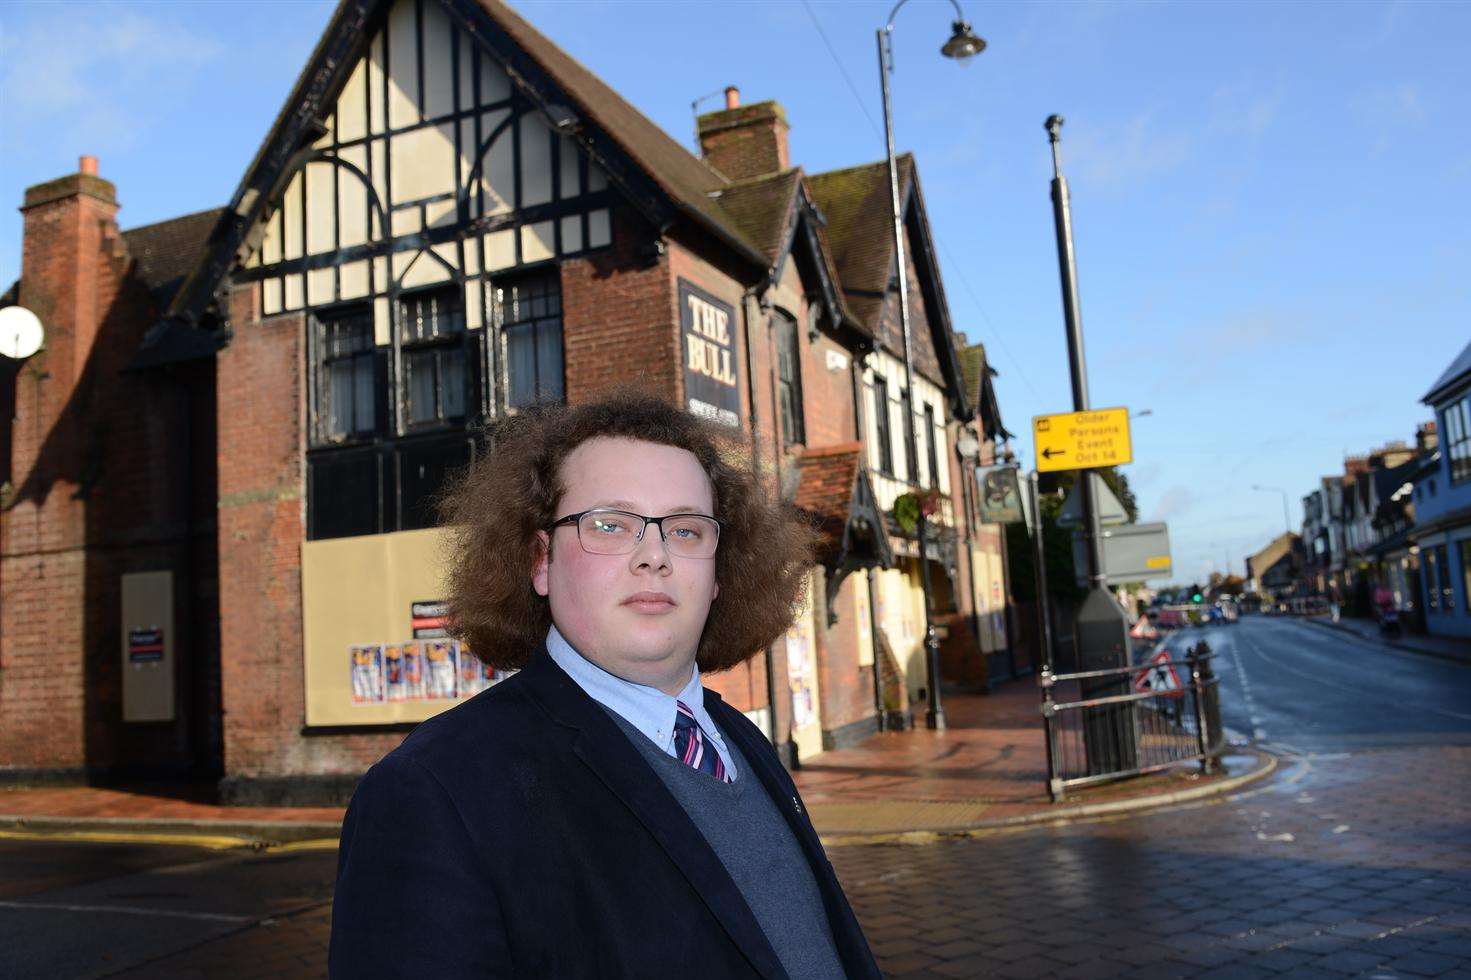 Lib Dem candidate for Snodland East in the upcoming borough election, Luke Chapman, who is campaigning against the proposed transformation of The Bull pub in to a Co-op